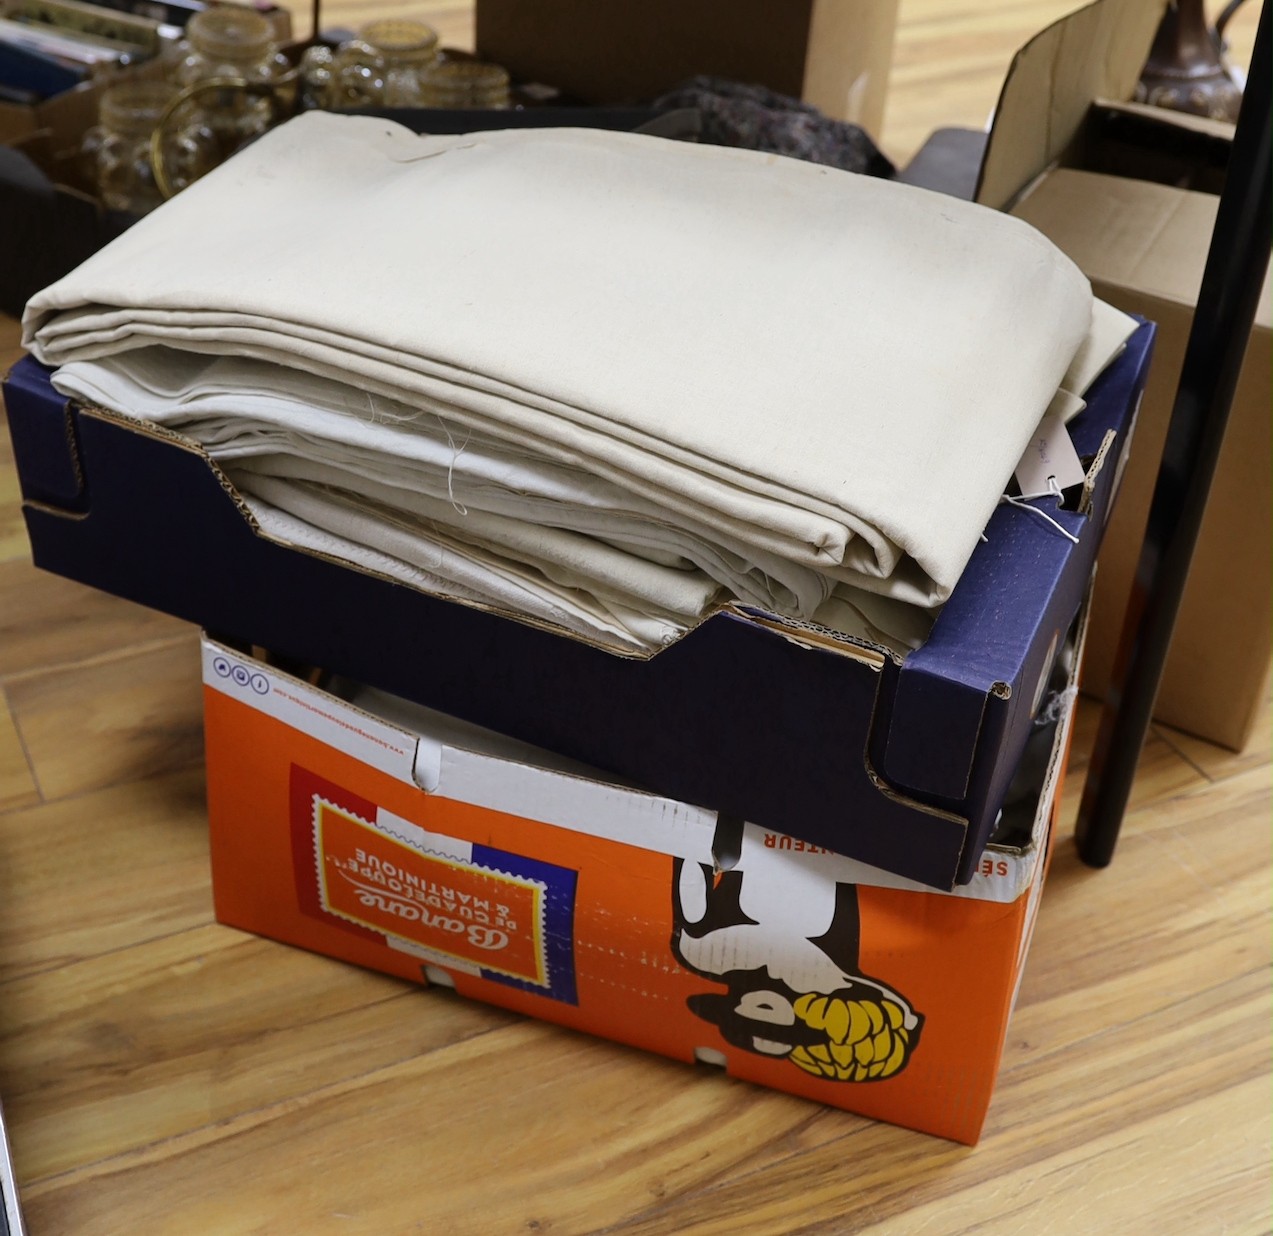 Two boxes of French provincial sheets